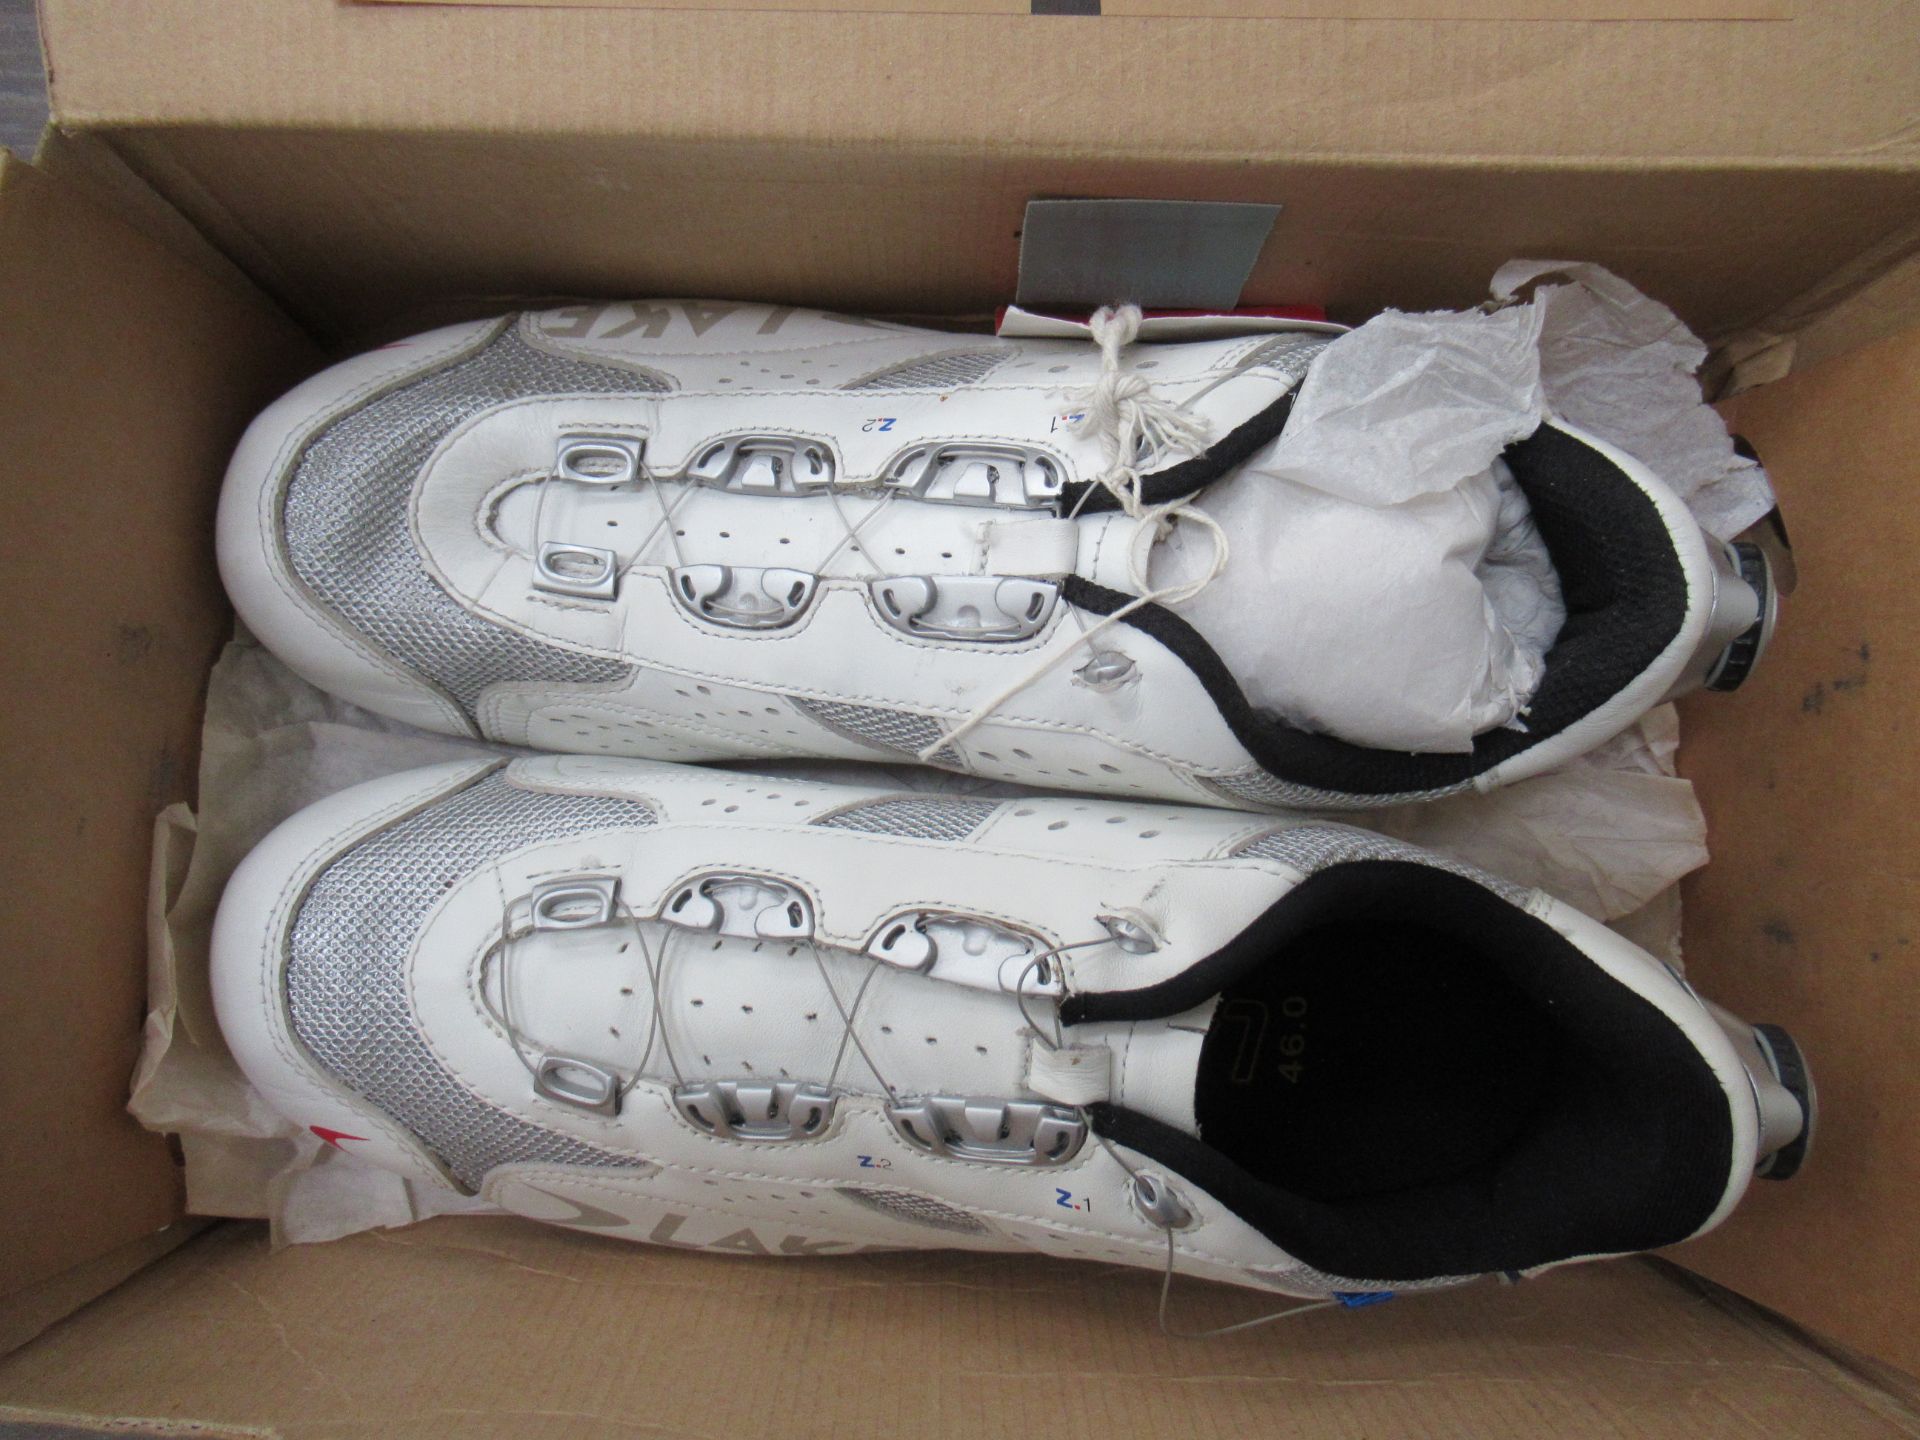 2 x Pairs of cycling shoes: 1 x Lake CX236C boxed EU size 46 (RRP£84.99) and 1 x FLR F-35 III boxed - Image 3 of 7